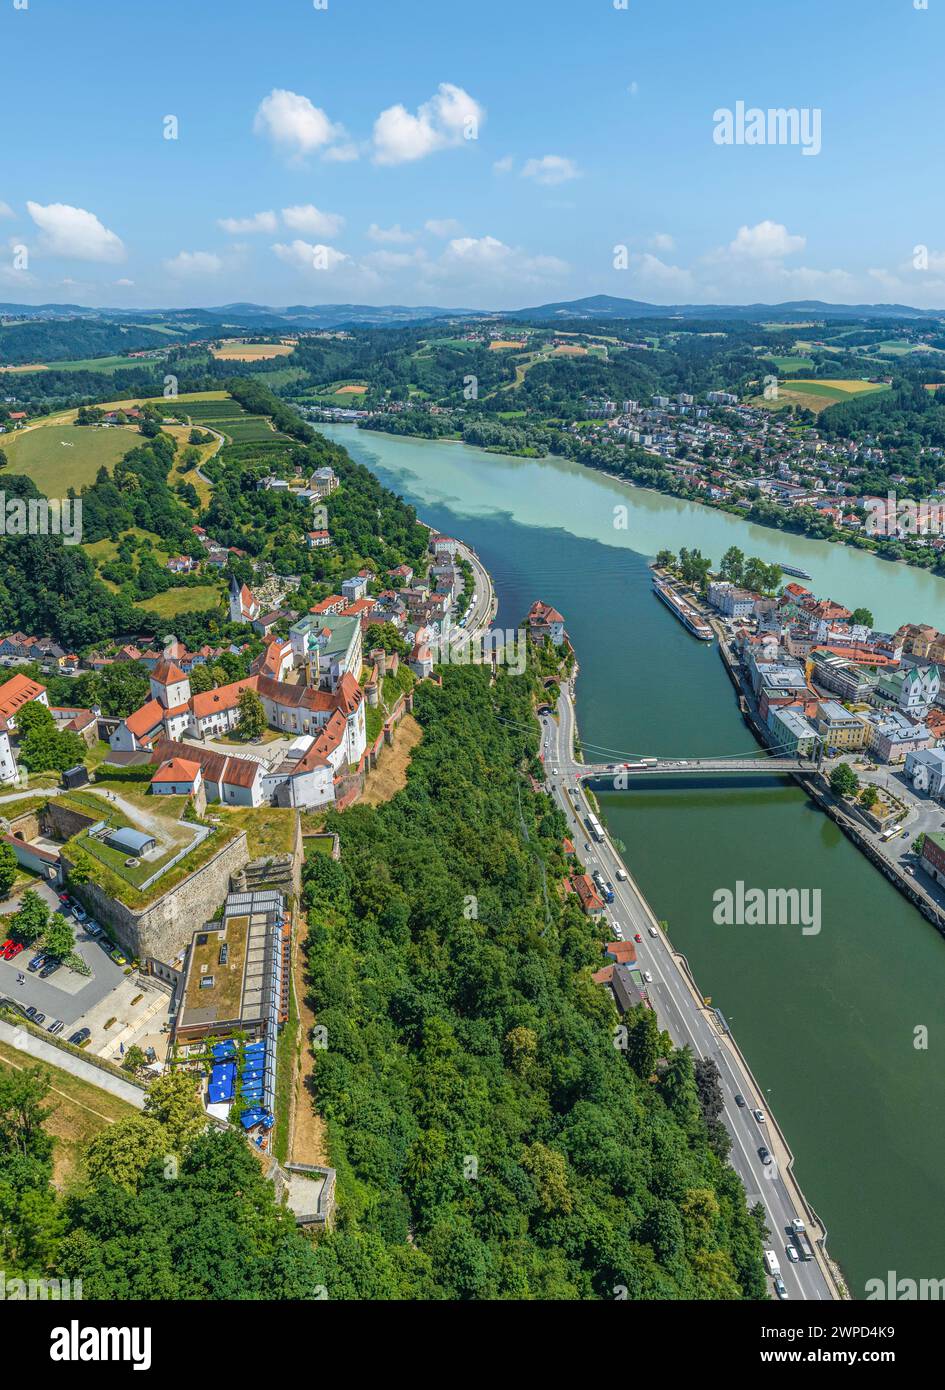 Aerial view of the three-river city of Passau at the confluence of the Danube, Inn and Ilz rivers Stock Photo